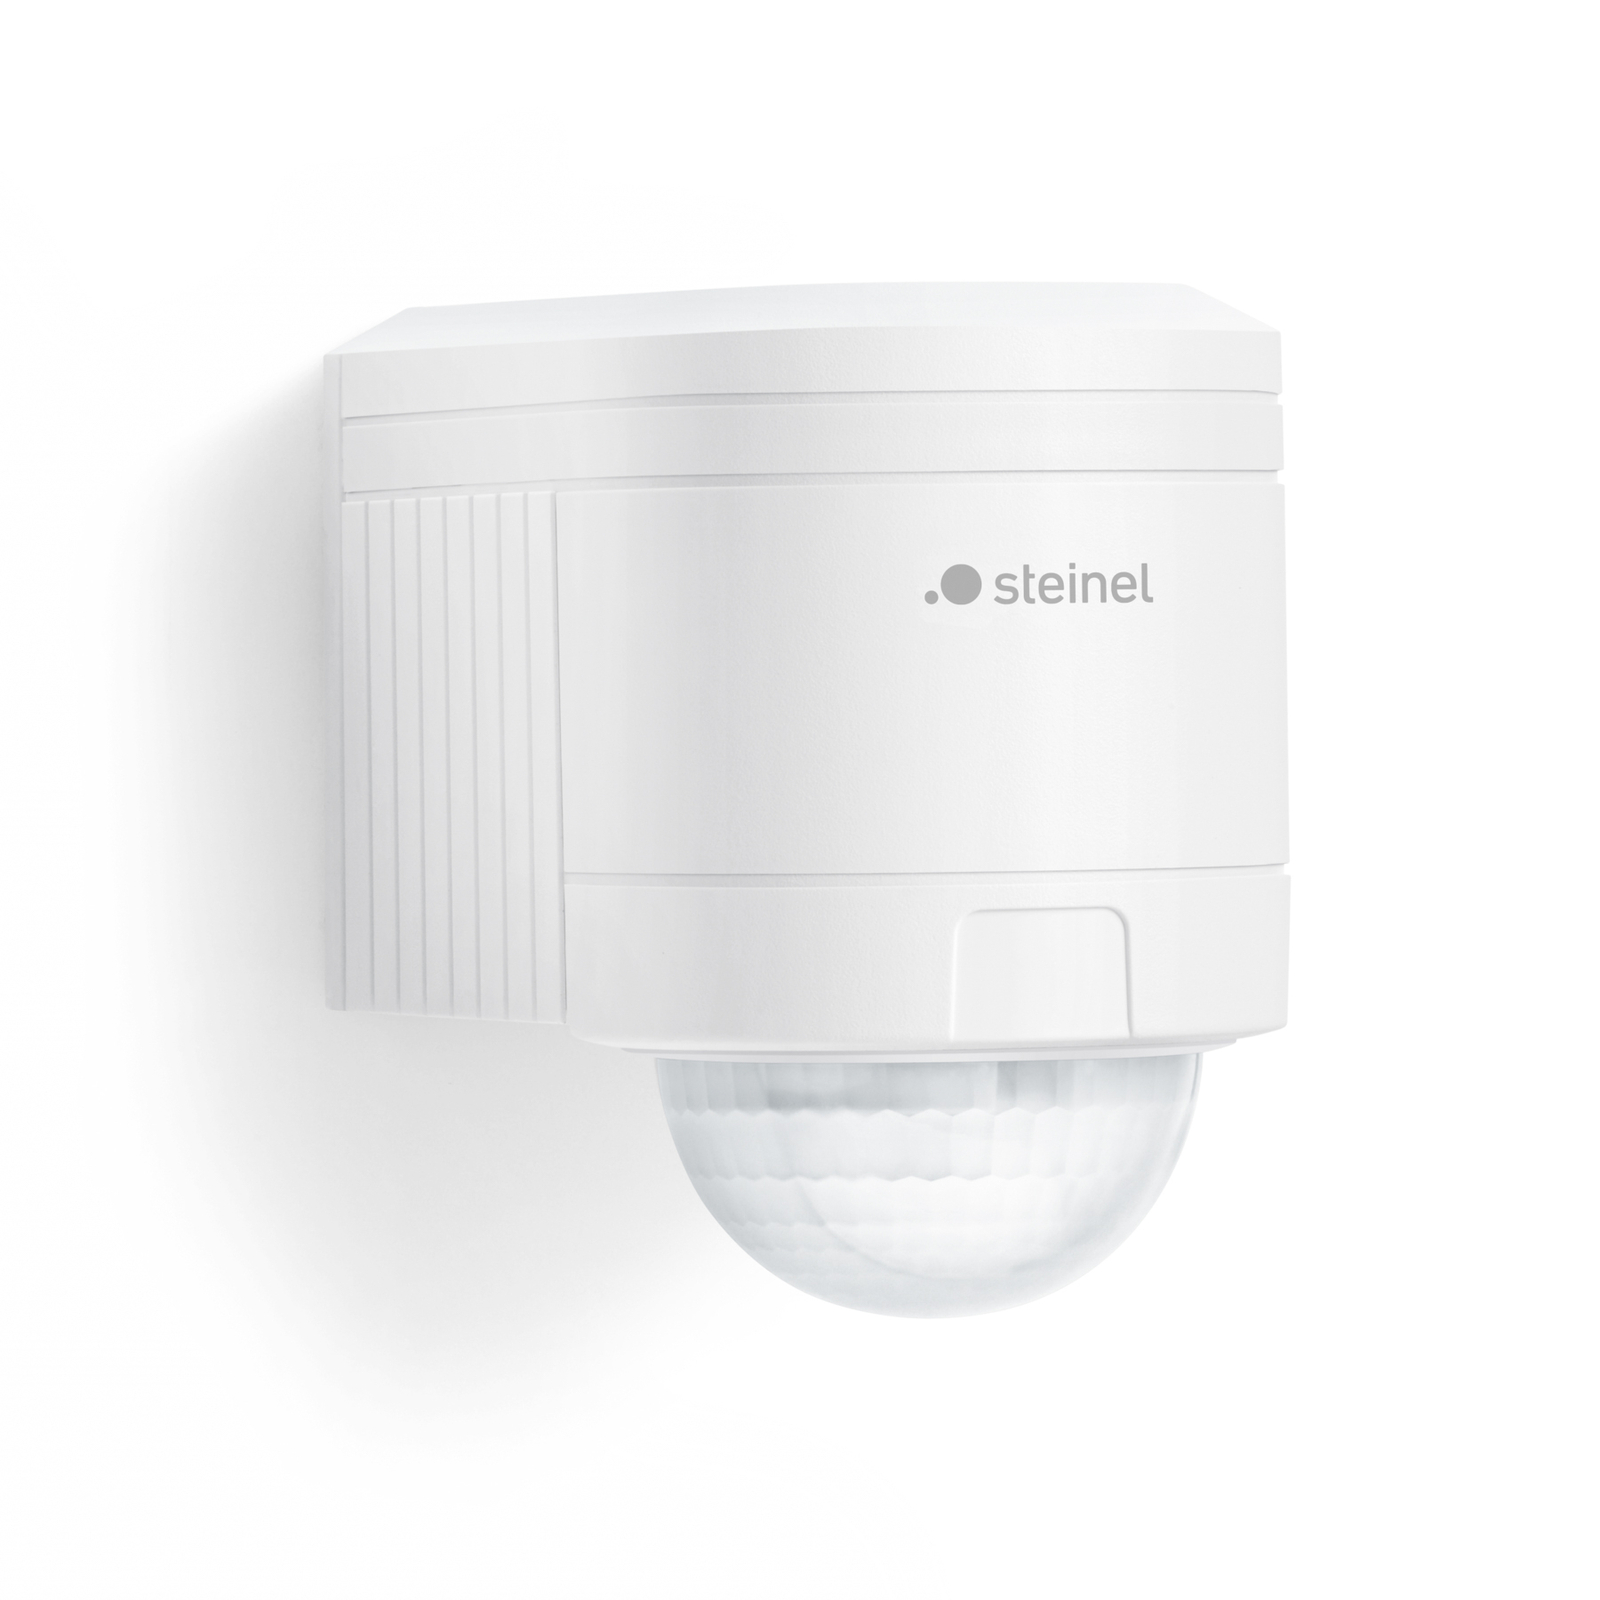 STEINEL IS 240 DUO motion detector white